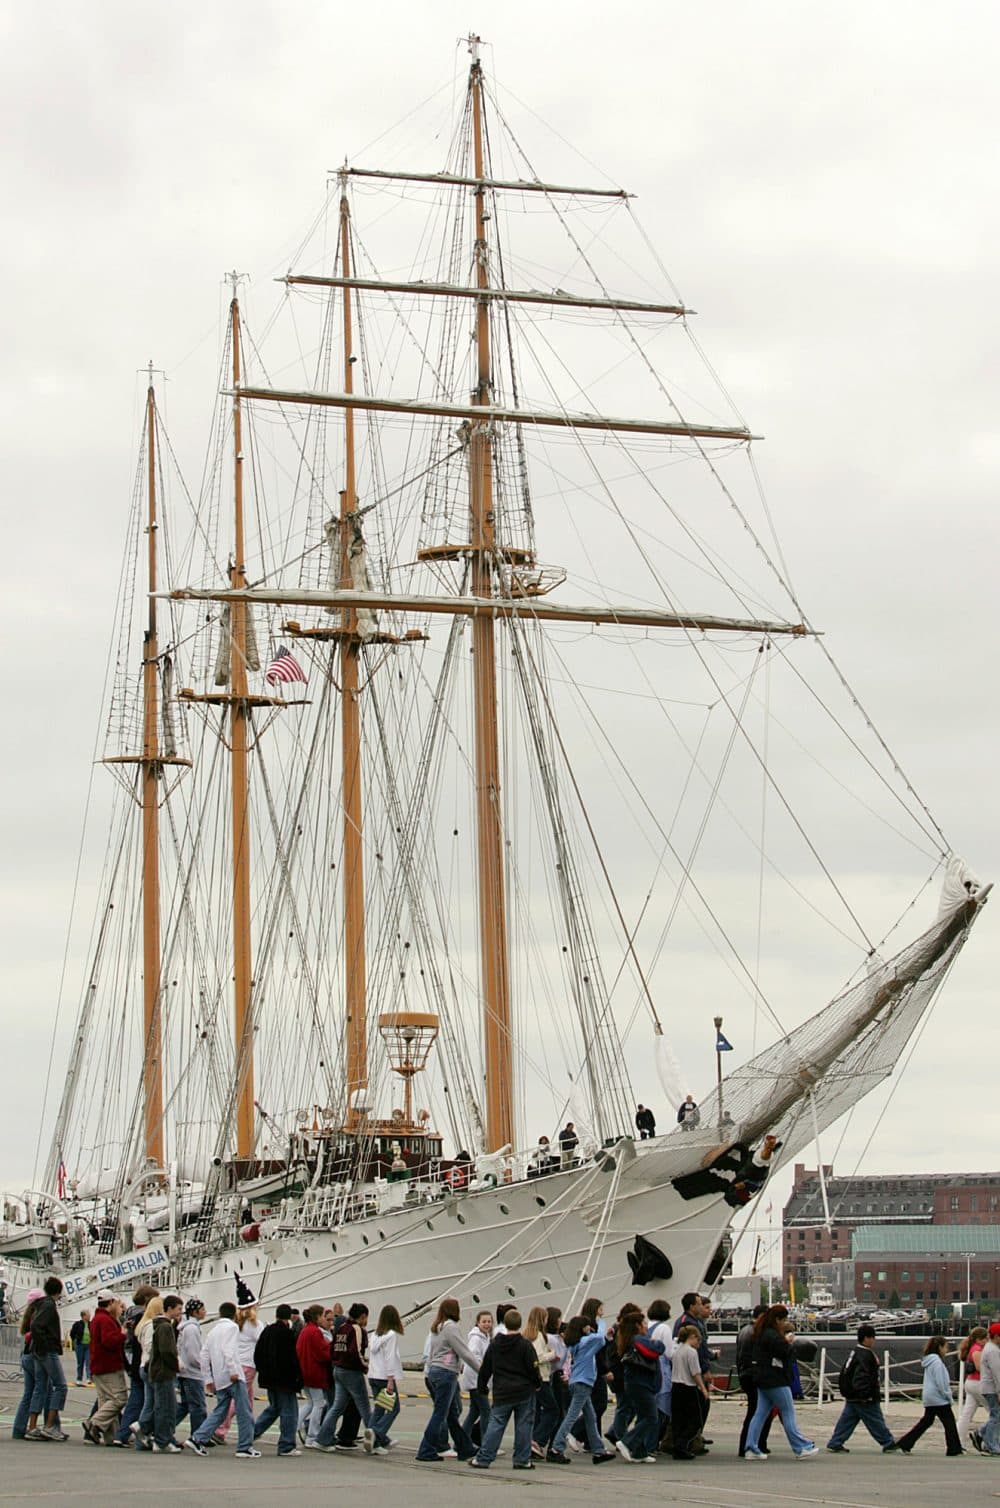 Visitors to the Charlestown Navy Yard walk in front of the Chilean tall ship B.E. Esmeralda, in Boston in 2005. (Steven Senne/AP)